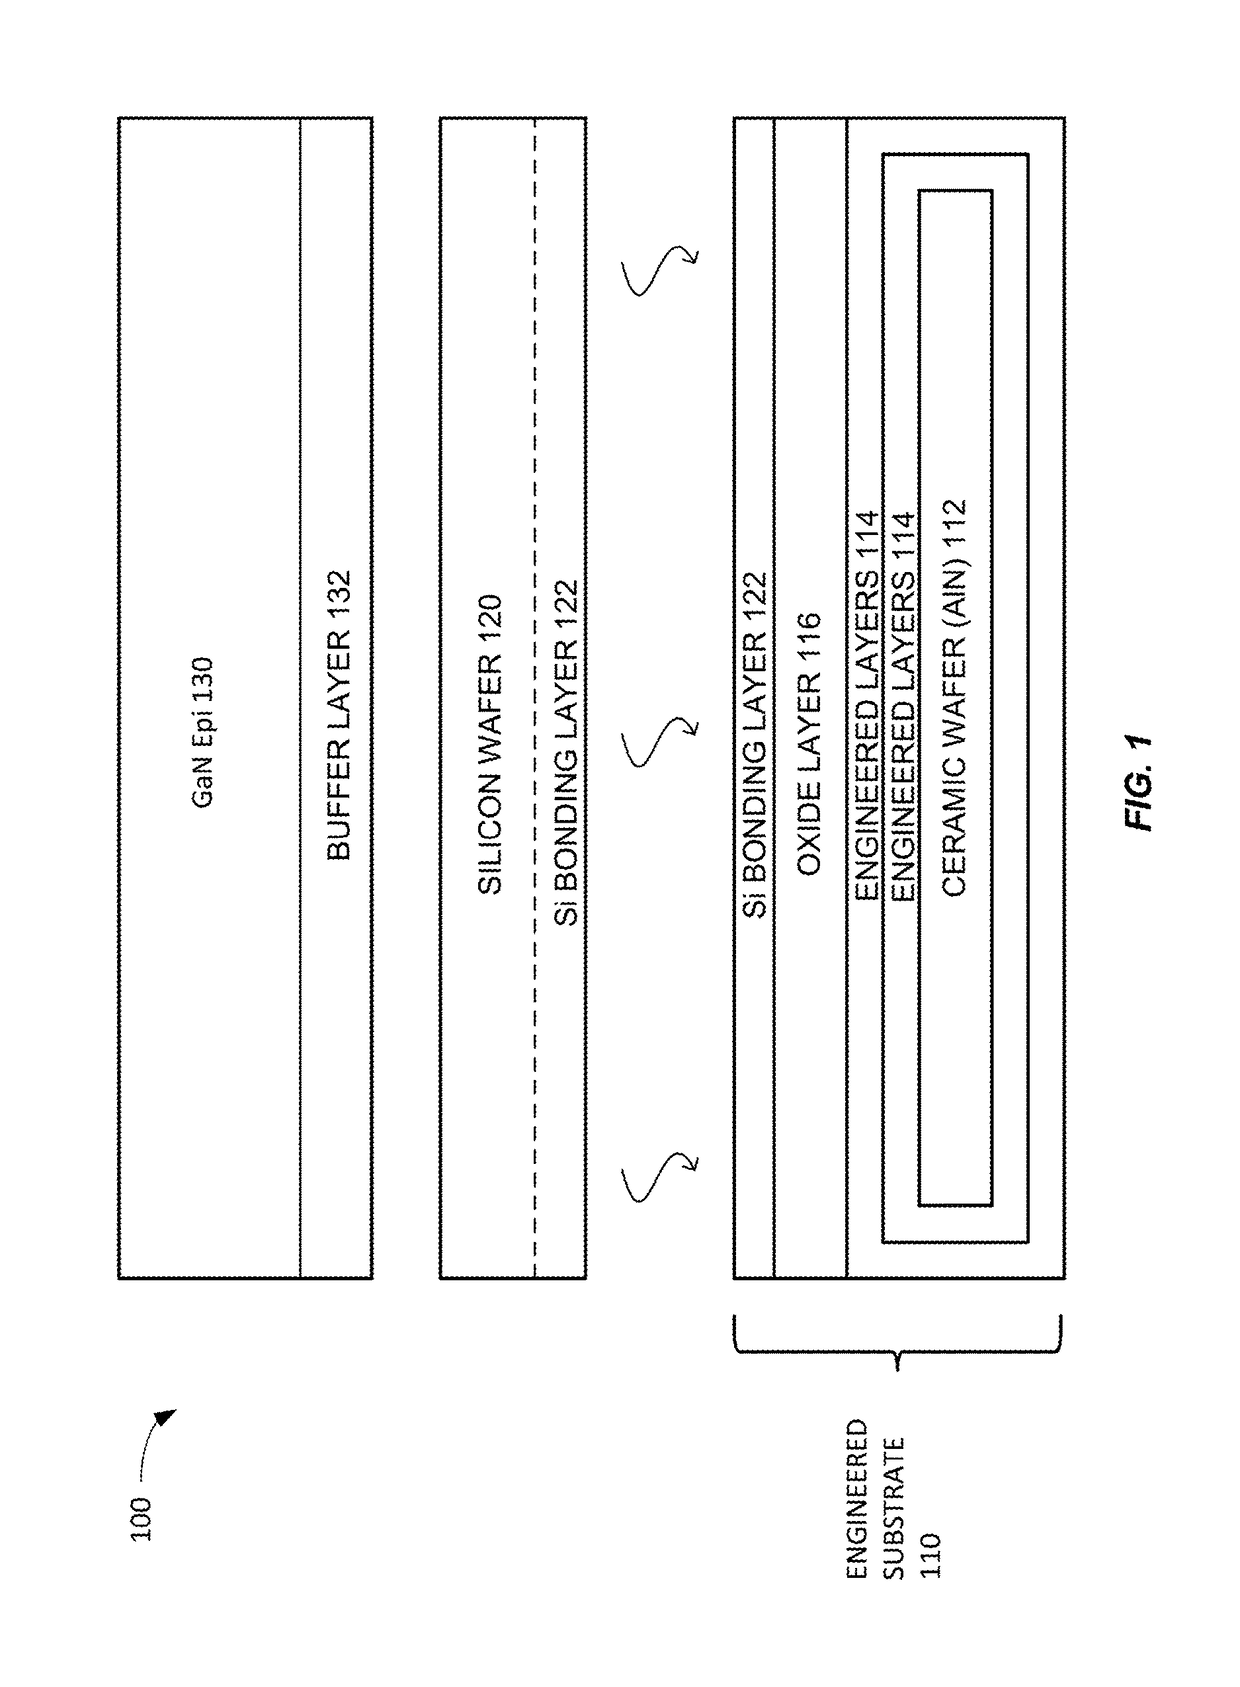 Wide Band Gap Device Integrated Circuit Architecture on Engineered Substrate